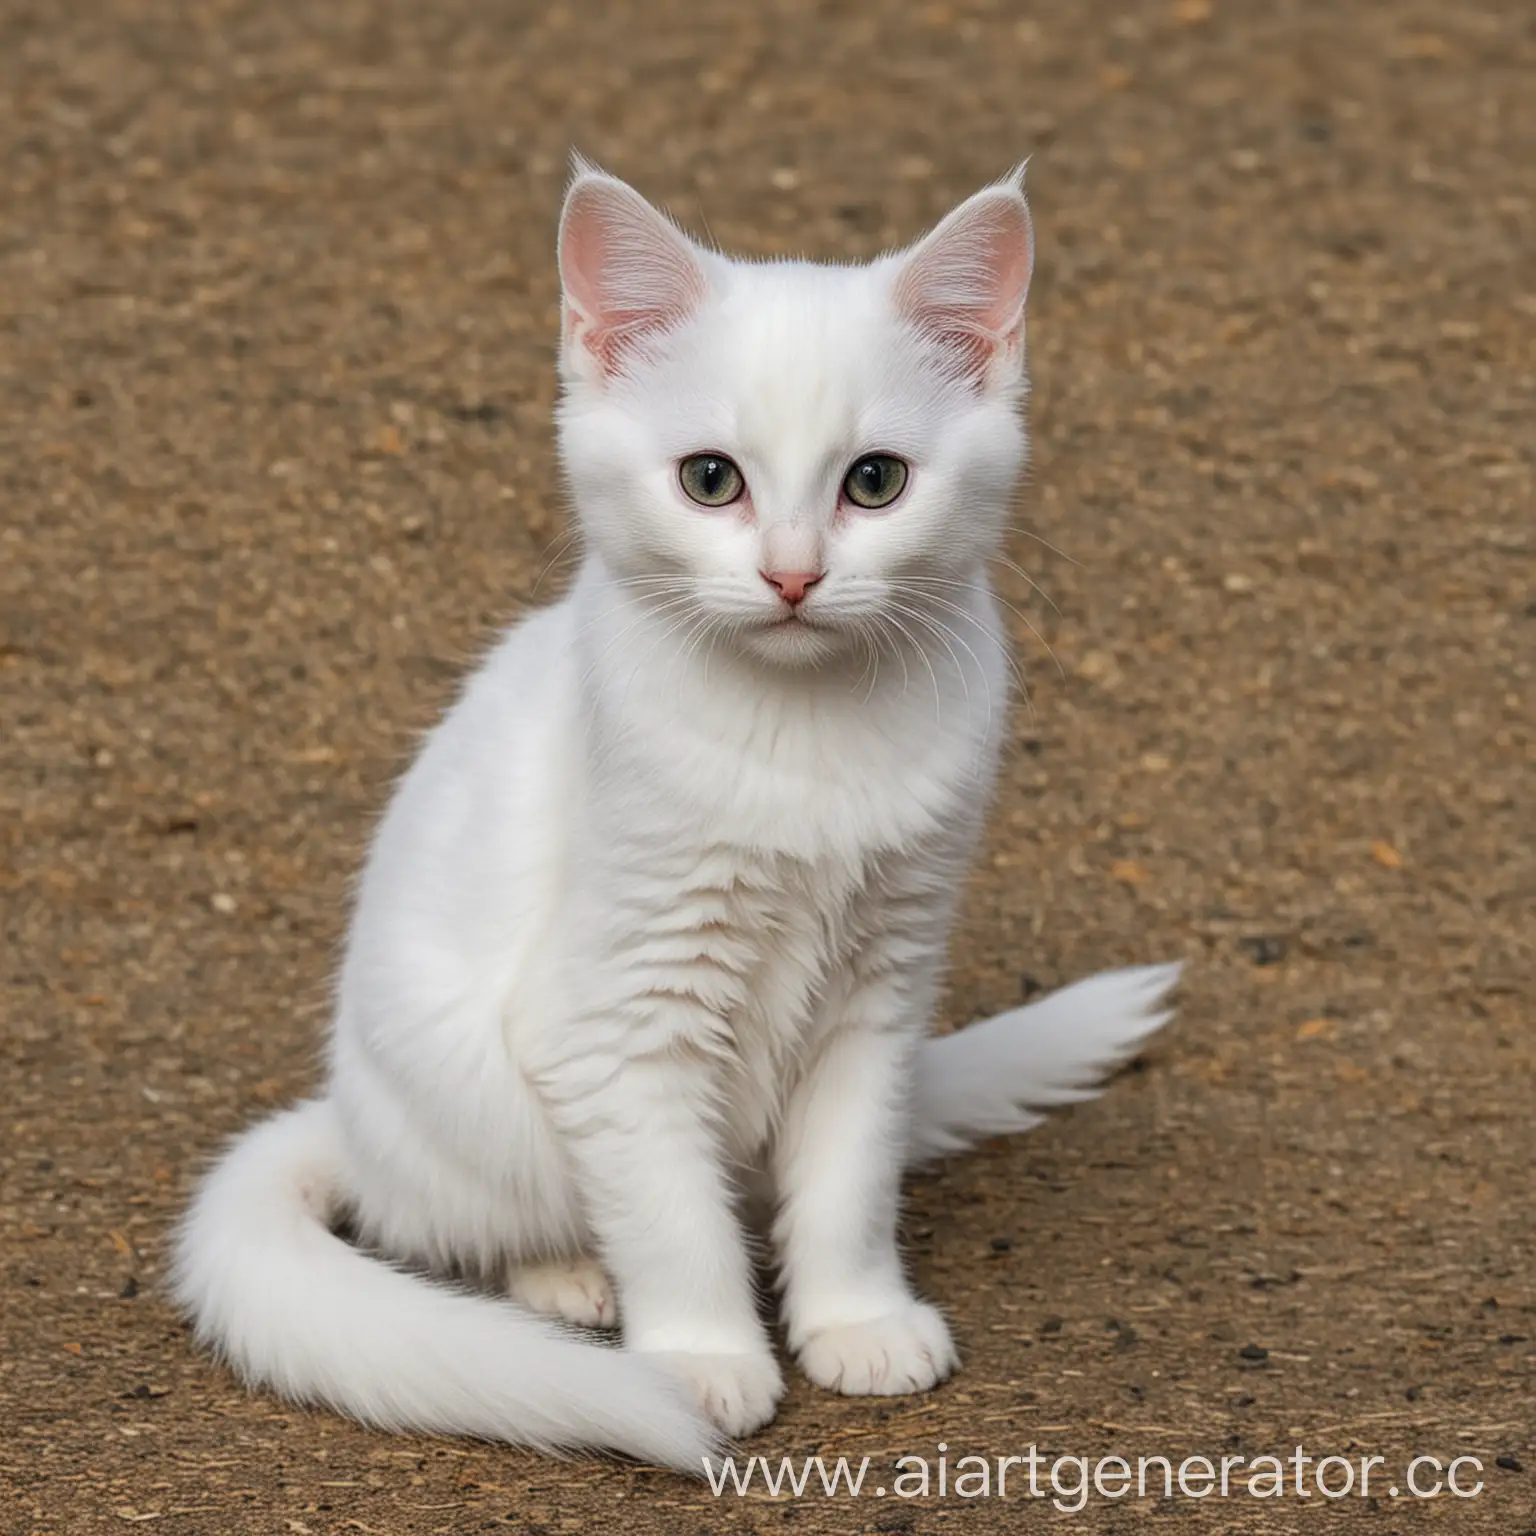 Cute-White-Kitty-with-a-Playful-Black-Tail